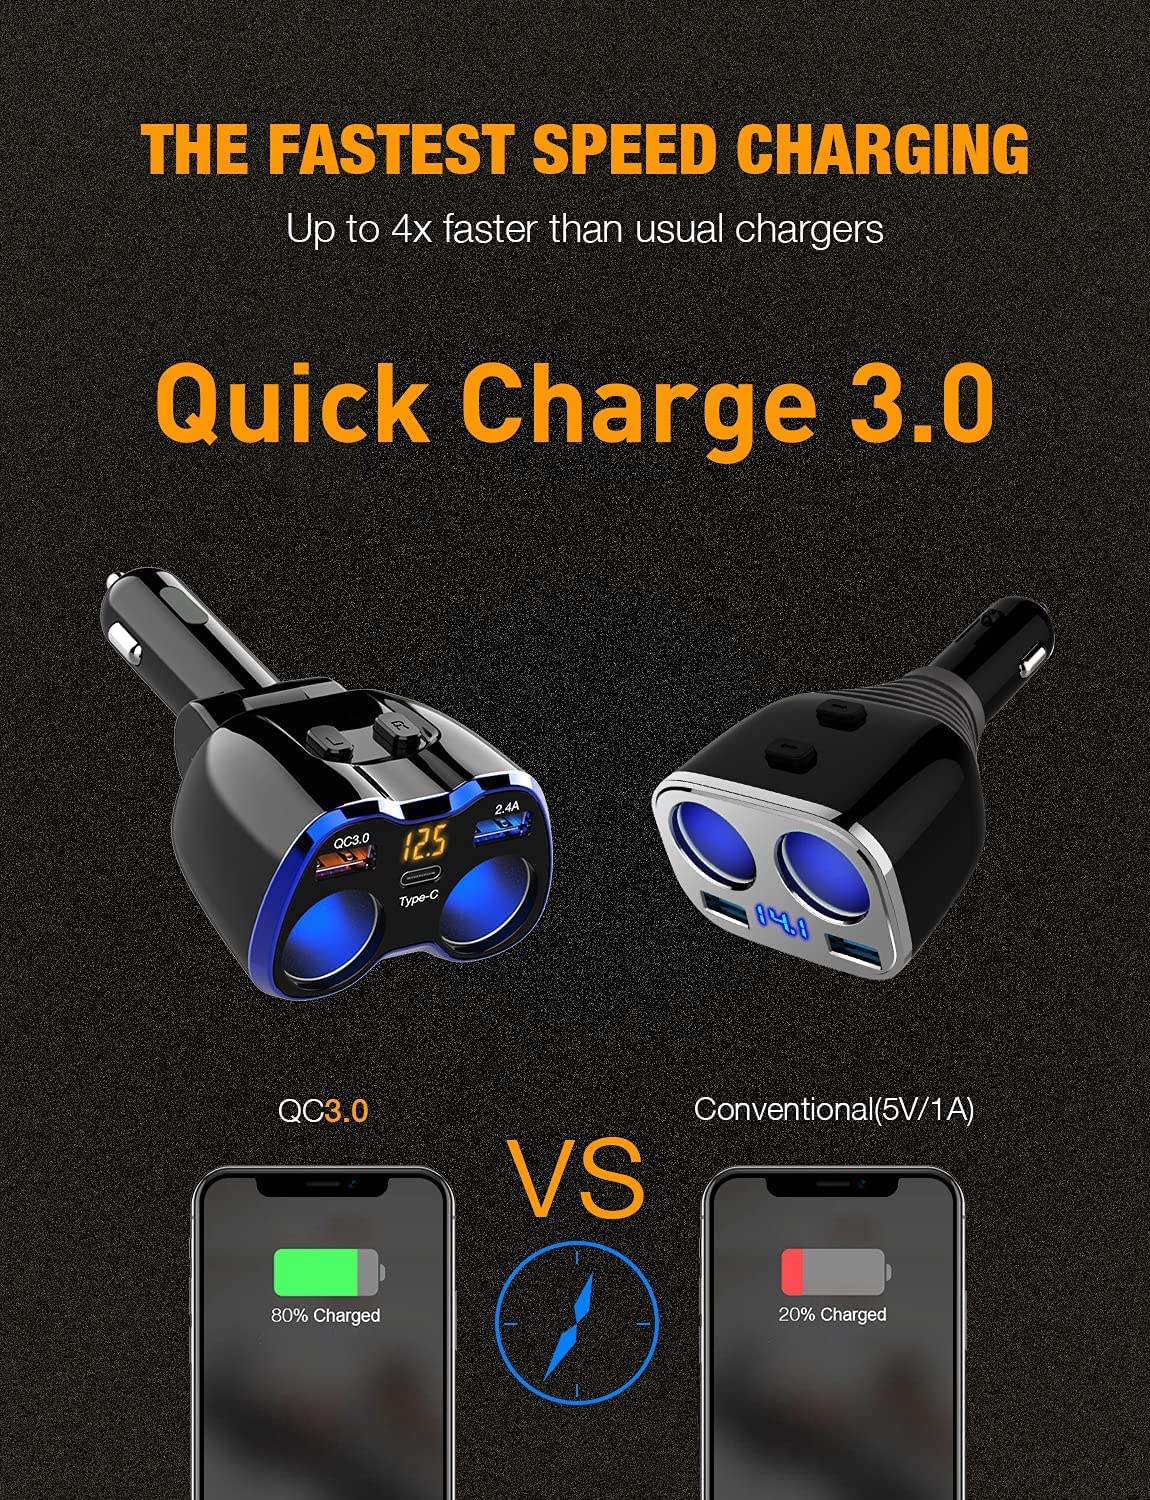 Car Charger, 150W 2-Socket Cigarette Lighter Splitter QC 3.0 Dual USB Ports 1 USB C Fast Car Adapter with Separate Switch LED Voltmeter Replaceable 15A Fuse for GPS/Dash Cam/Phone/iPad